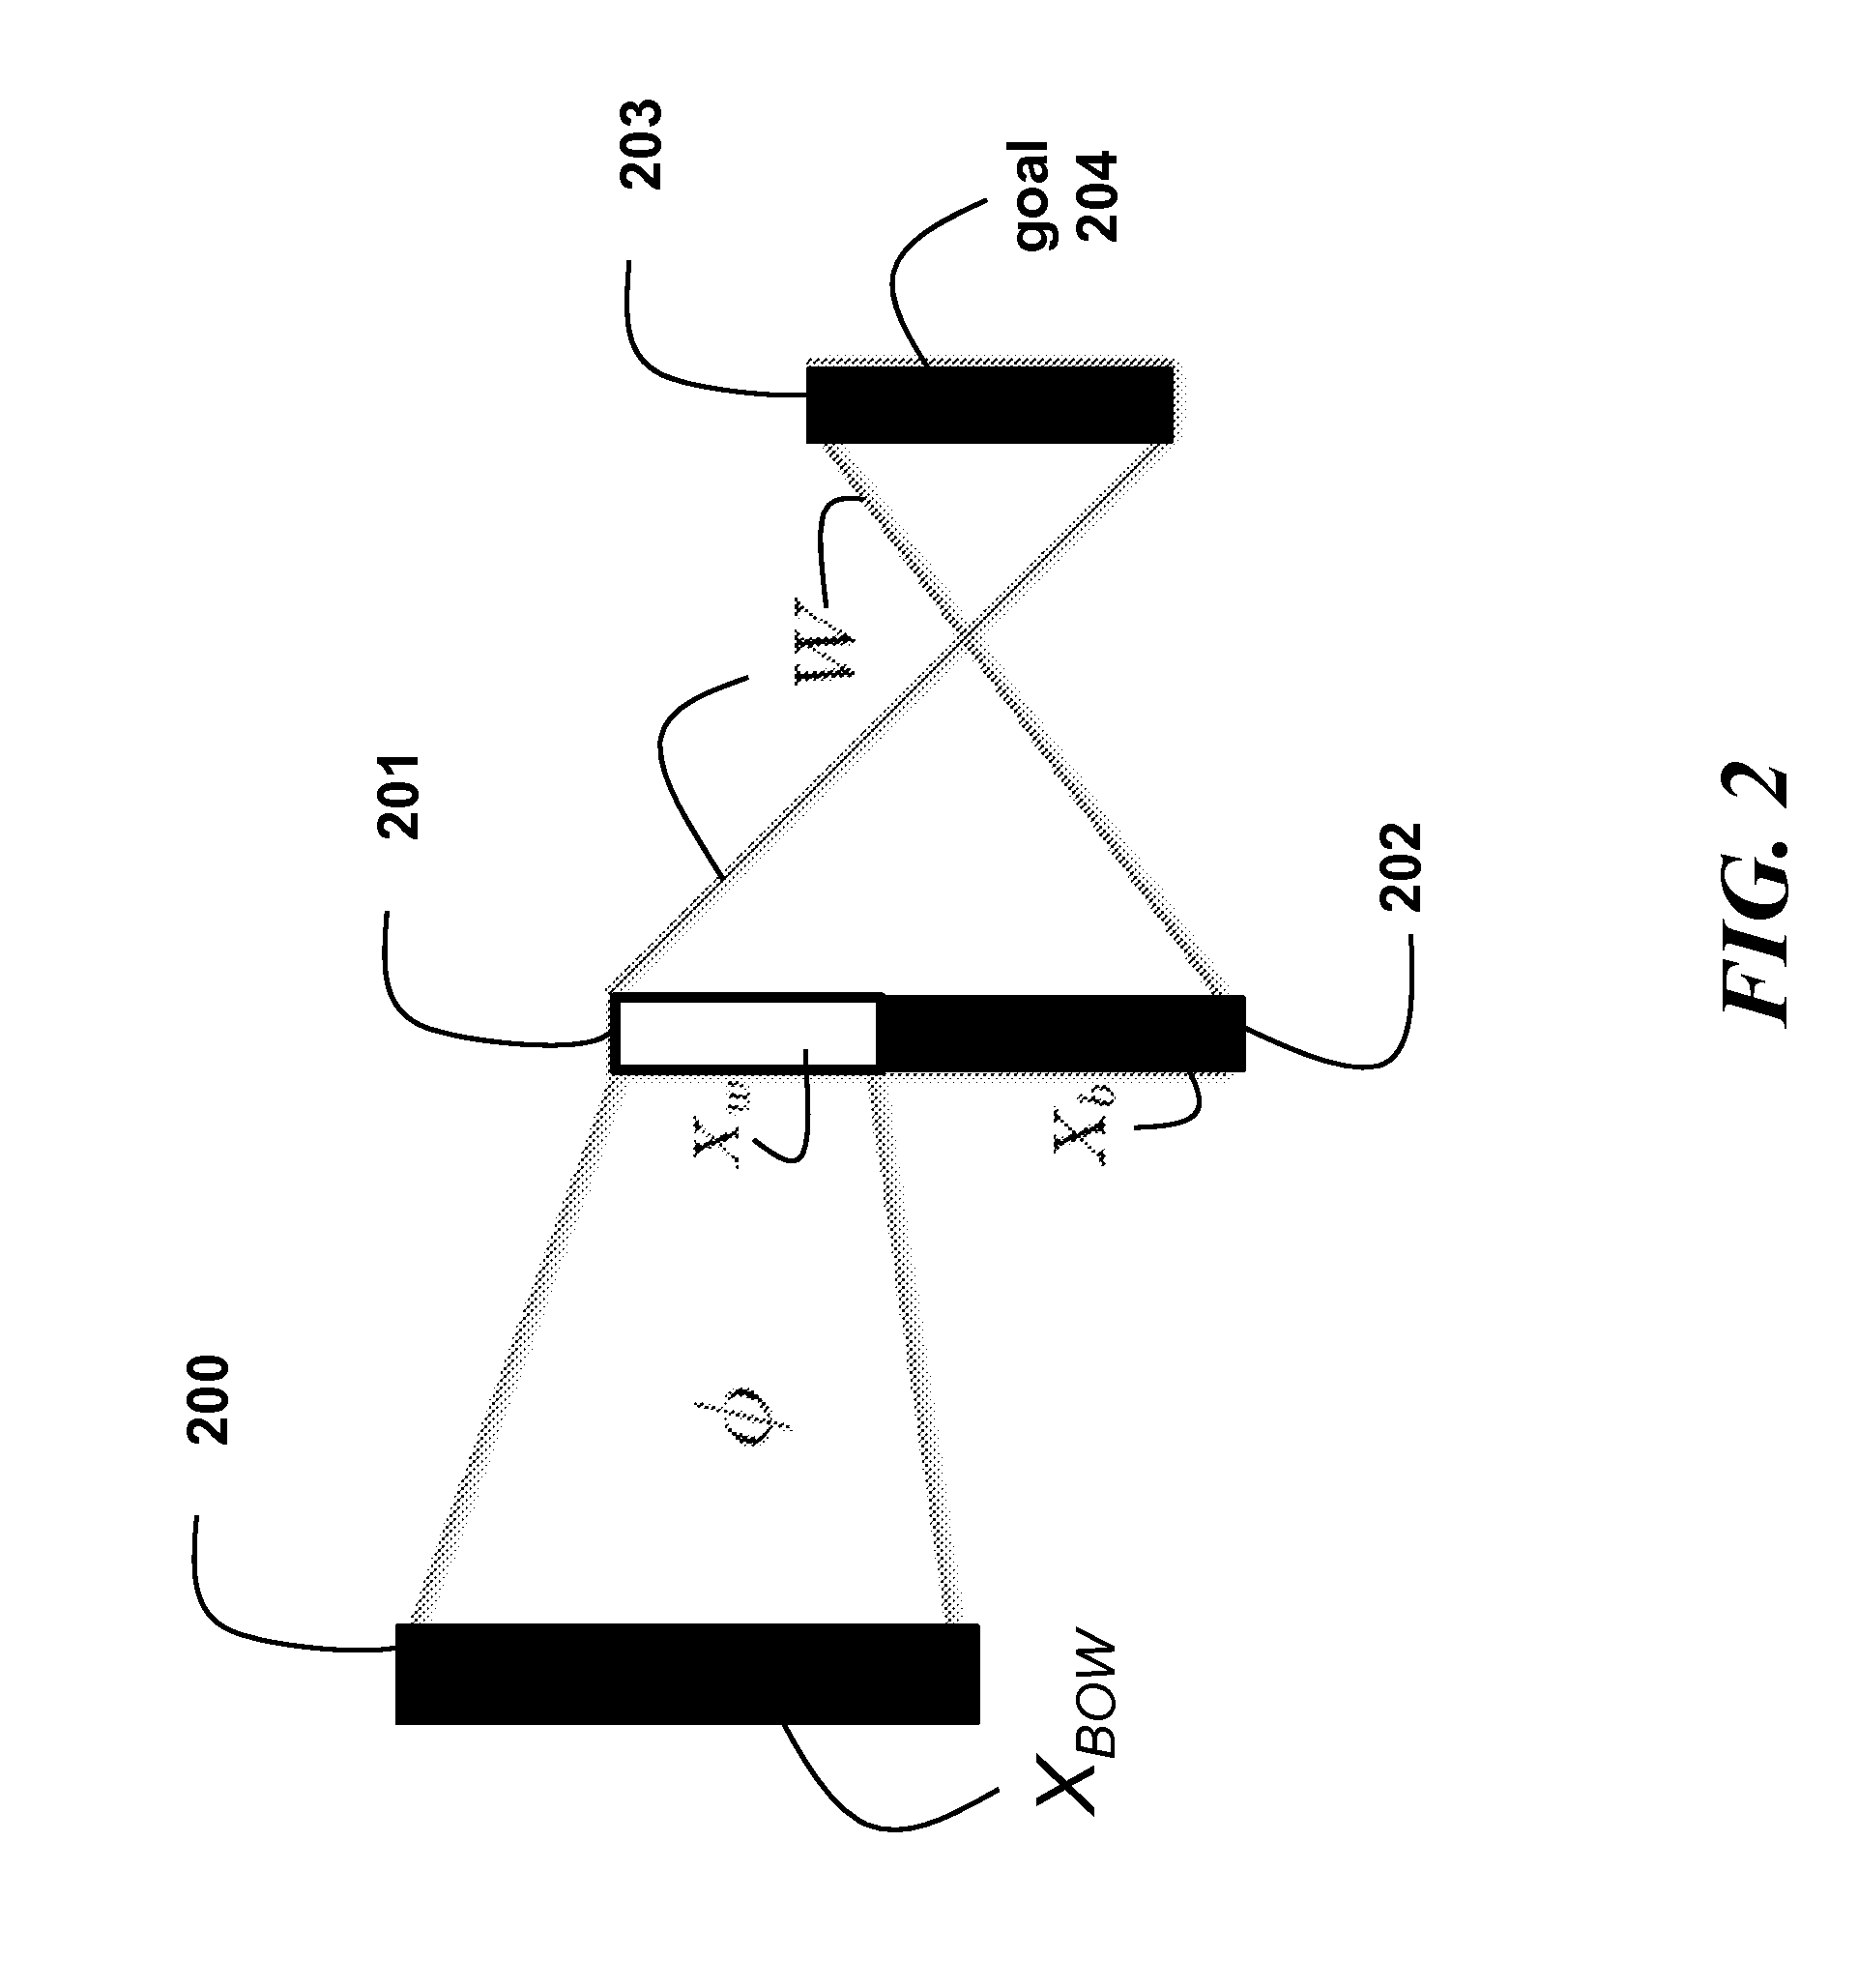 Method for using a Multi-Scale Recurrent Neural Network with Pretraining for Spoken Language Understanding Tasks